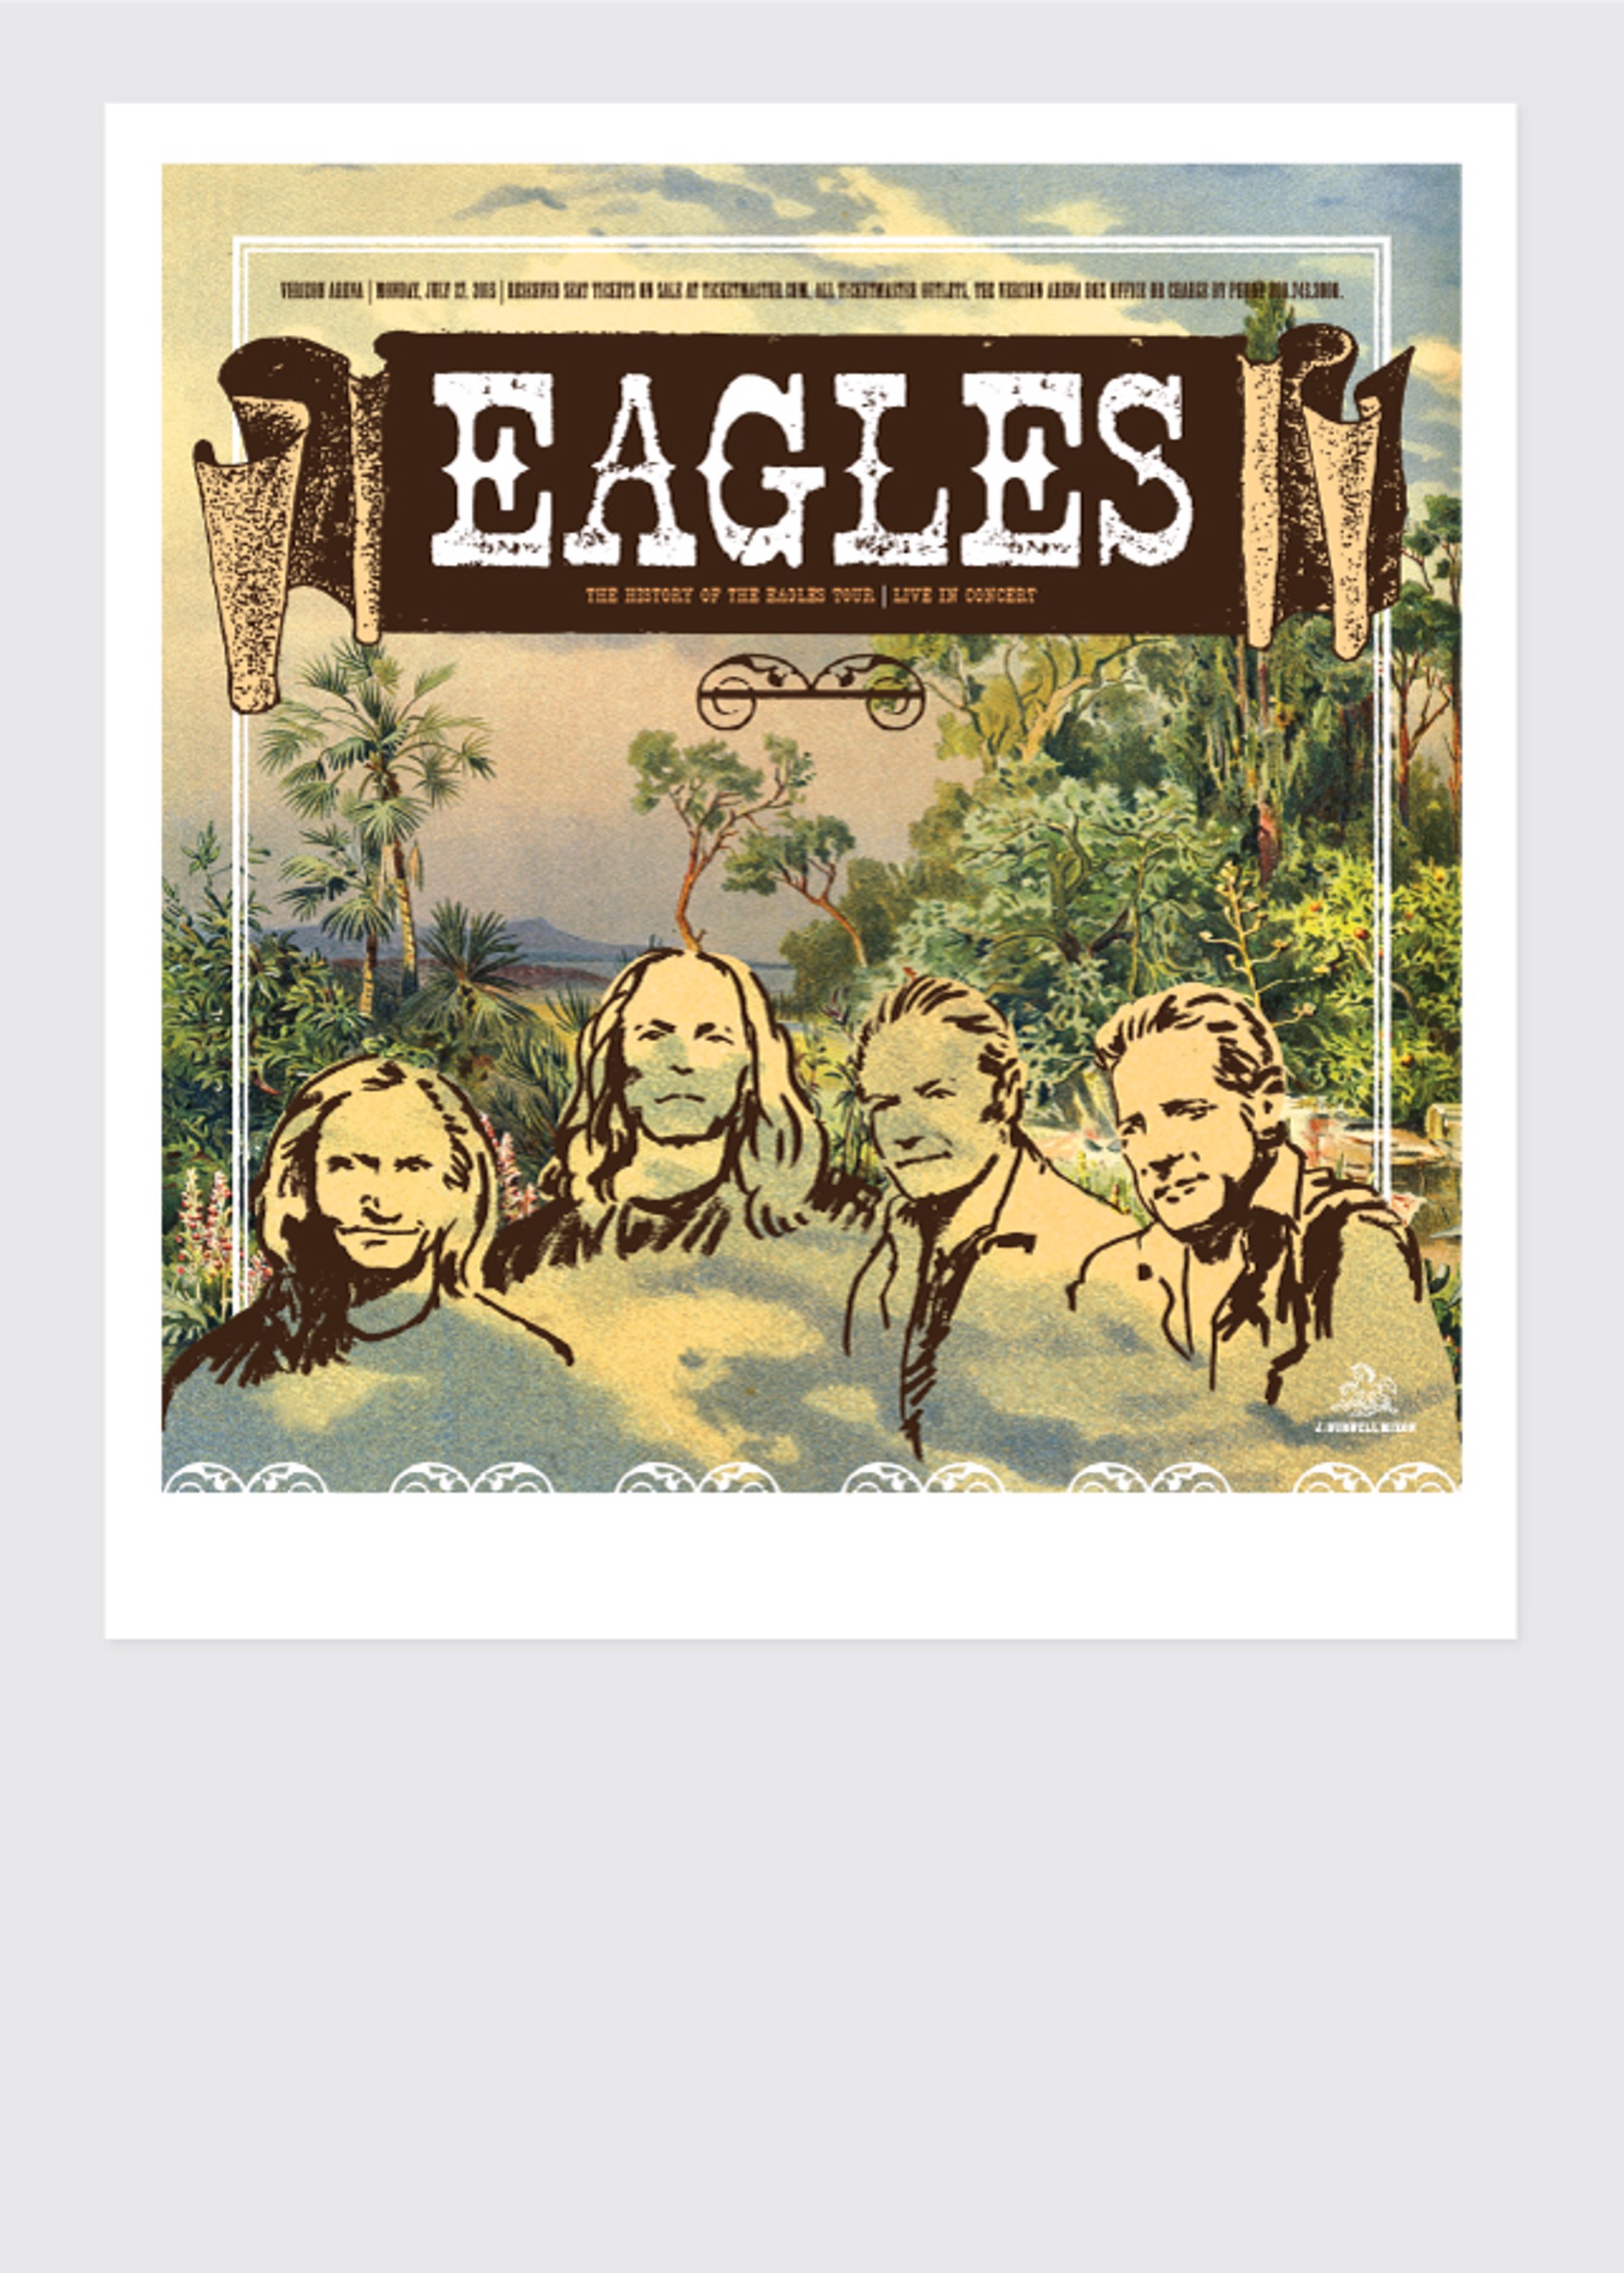 Eagles Concert Poster by Jamie Burwell Mixon